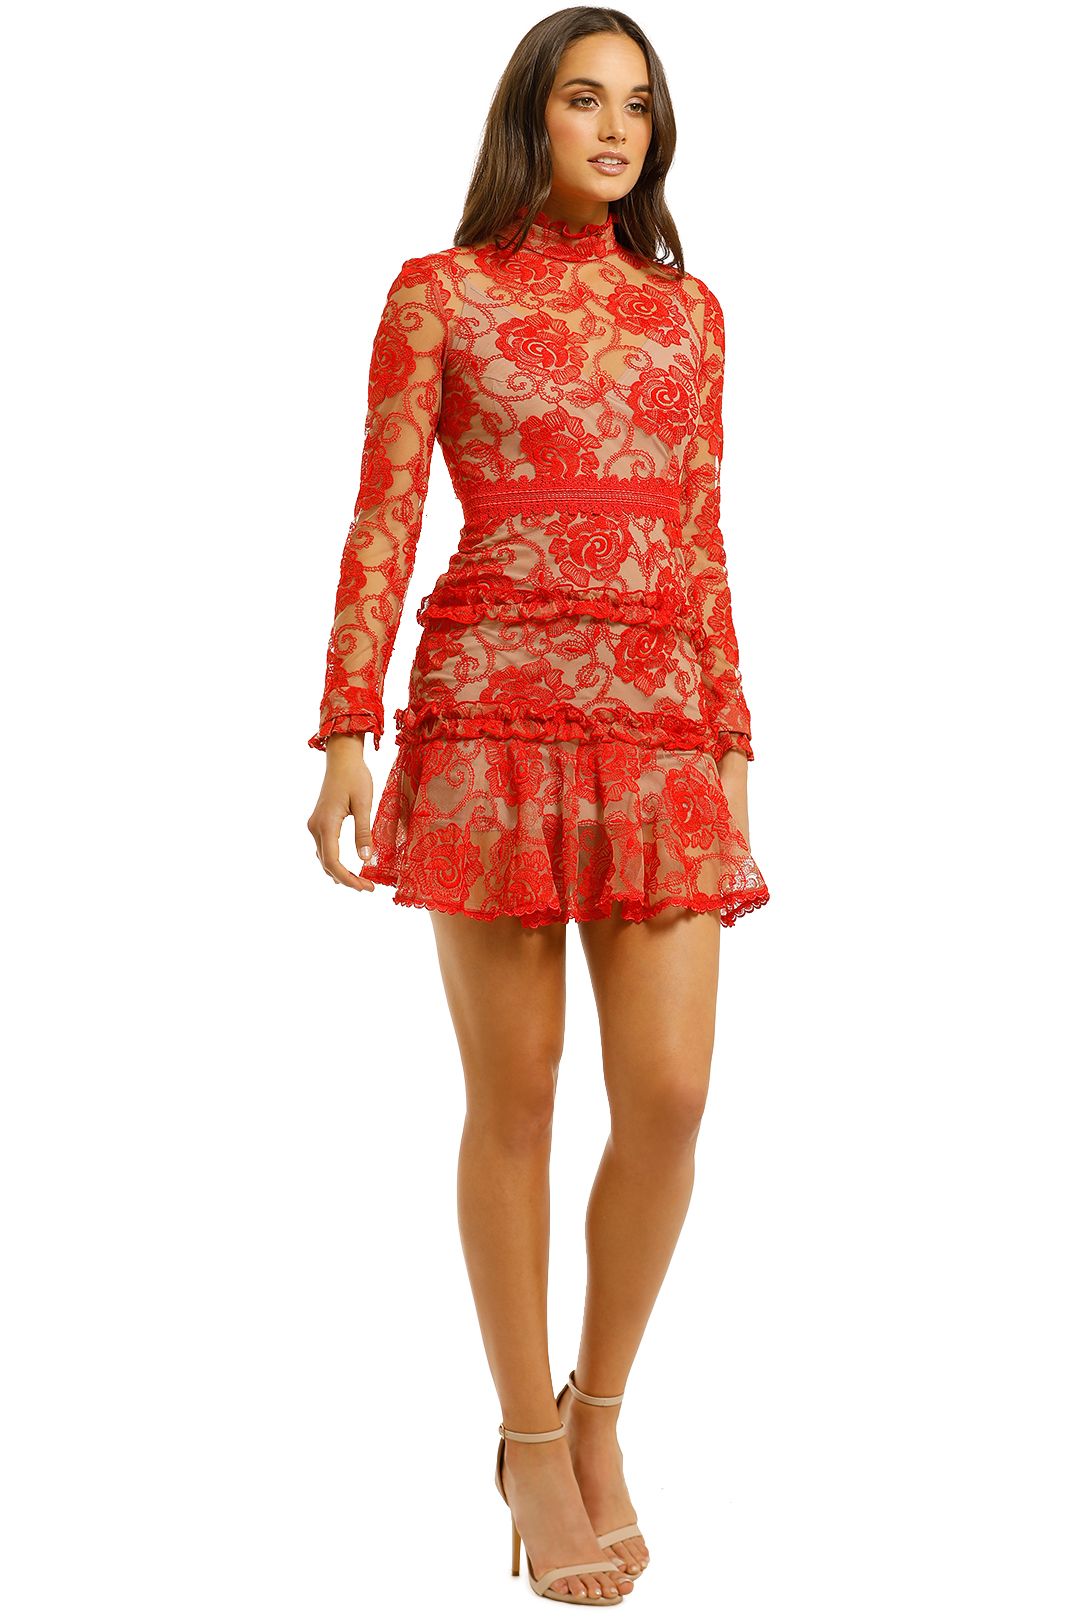 Nicholas-The-Label-Rosie-Lace-High-Neck-Red-Side